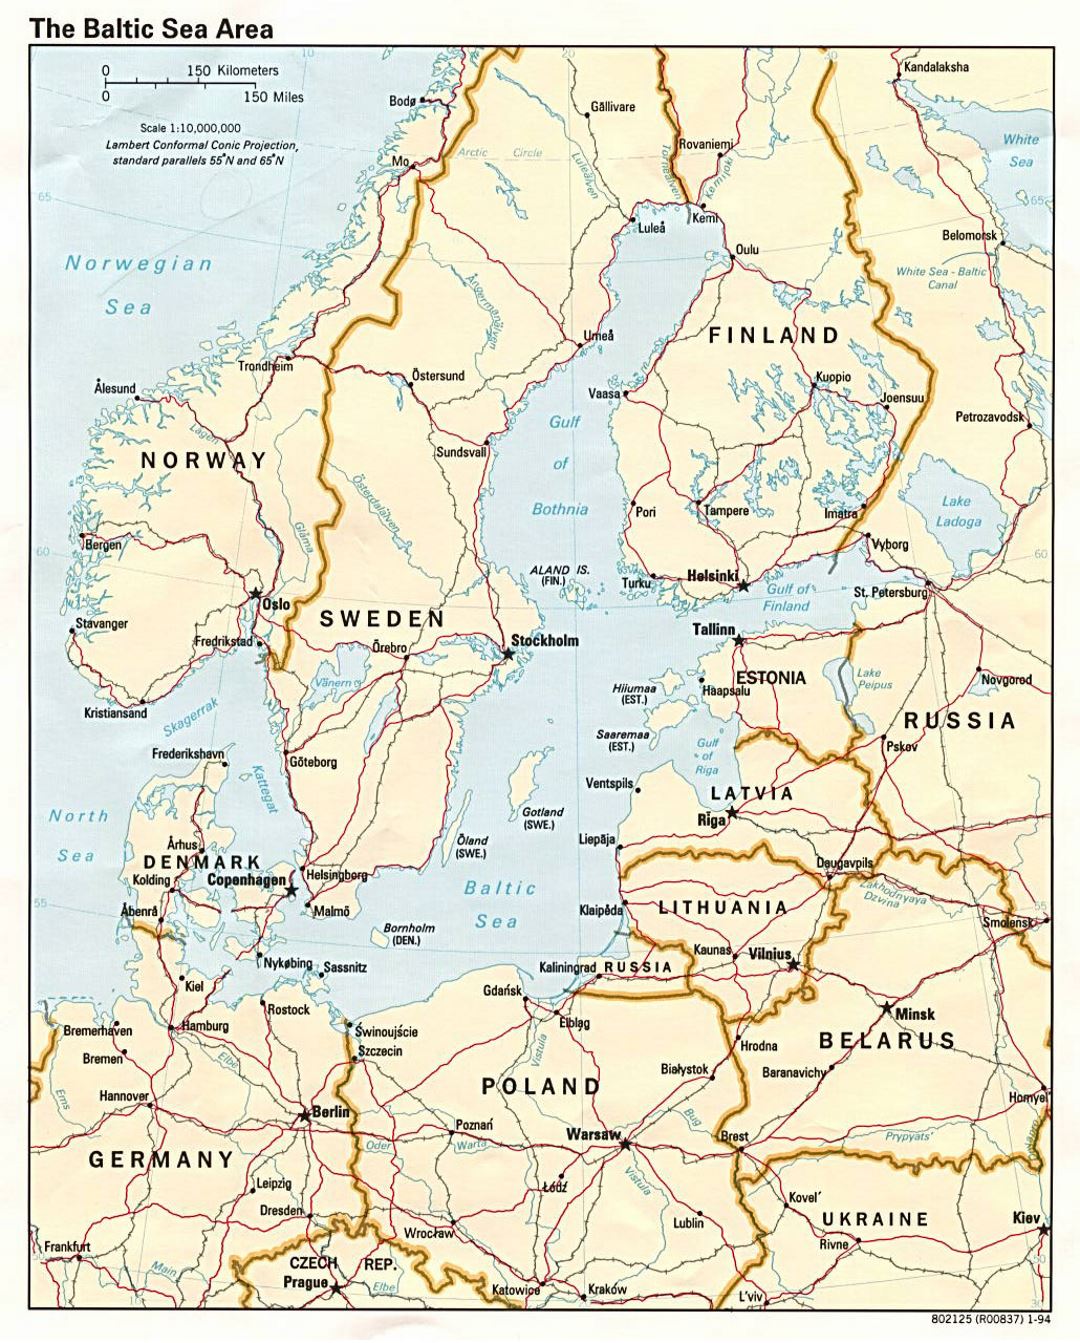 Large map of the Baltic Sea Area - 1994